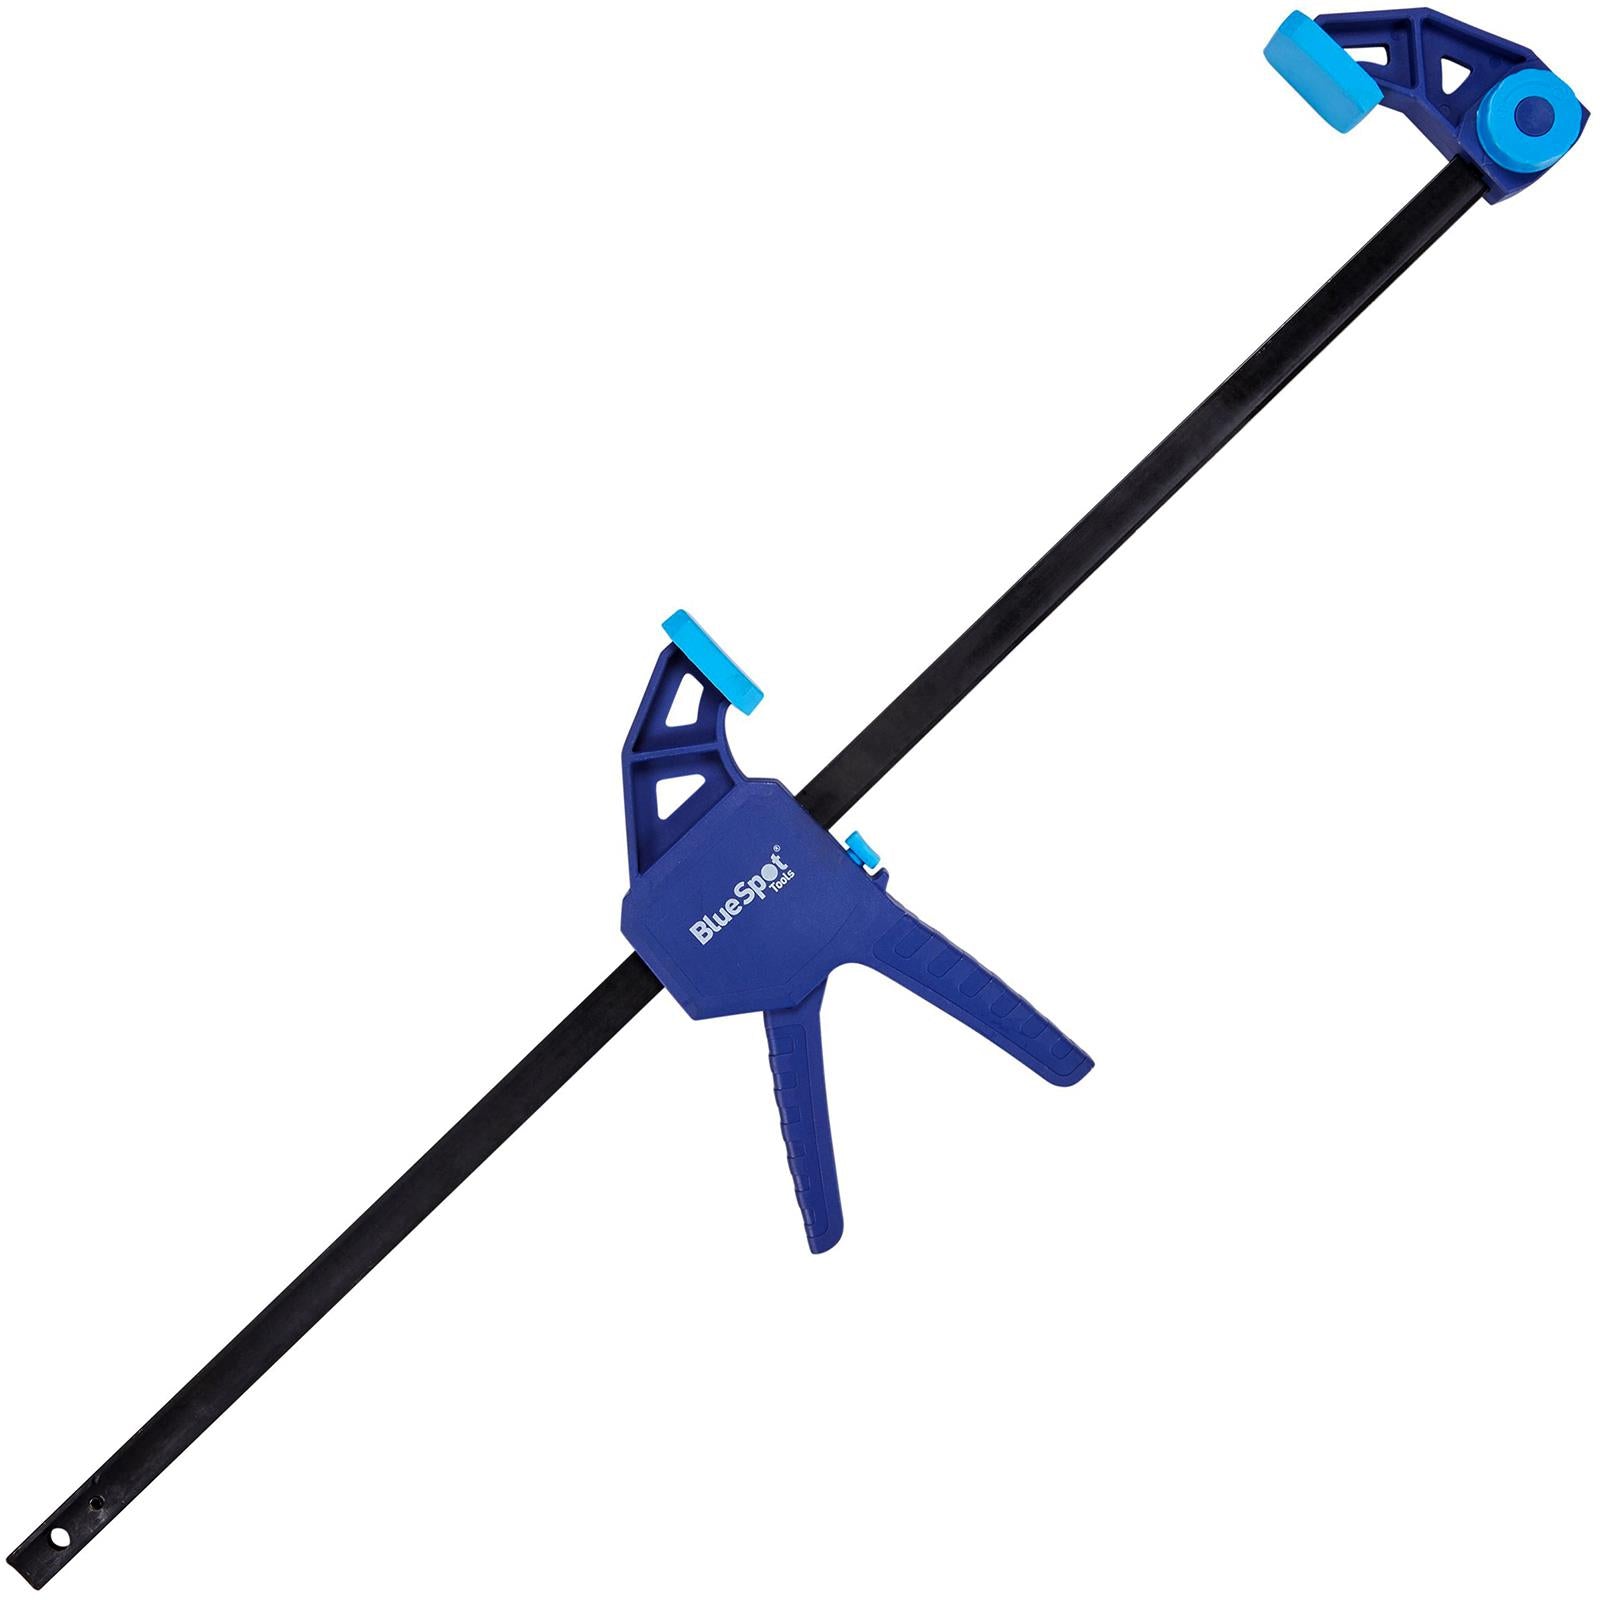 BlueSpot Heavy Duty Ratchet Speed Clamp and Spreader 600mm (24")